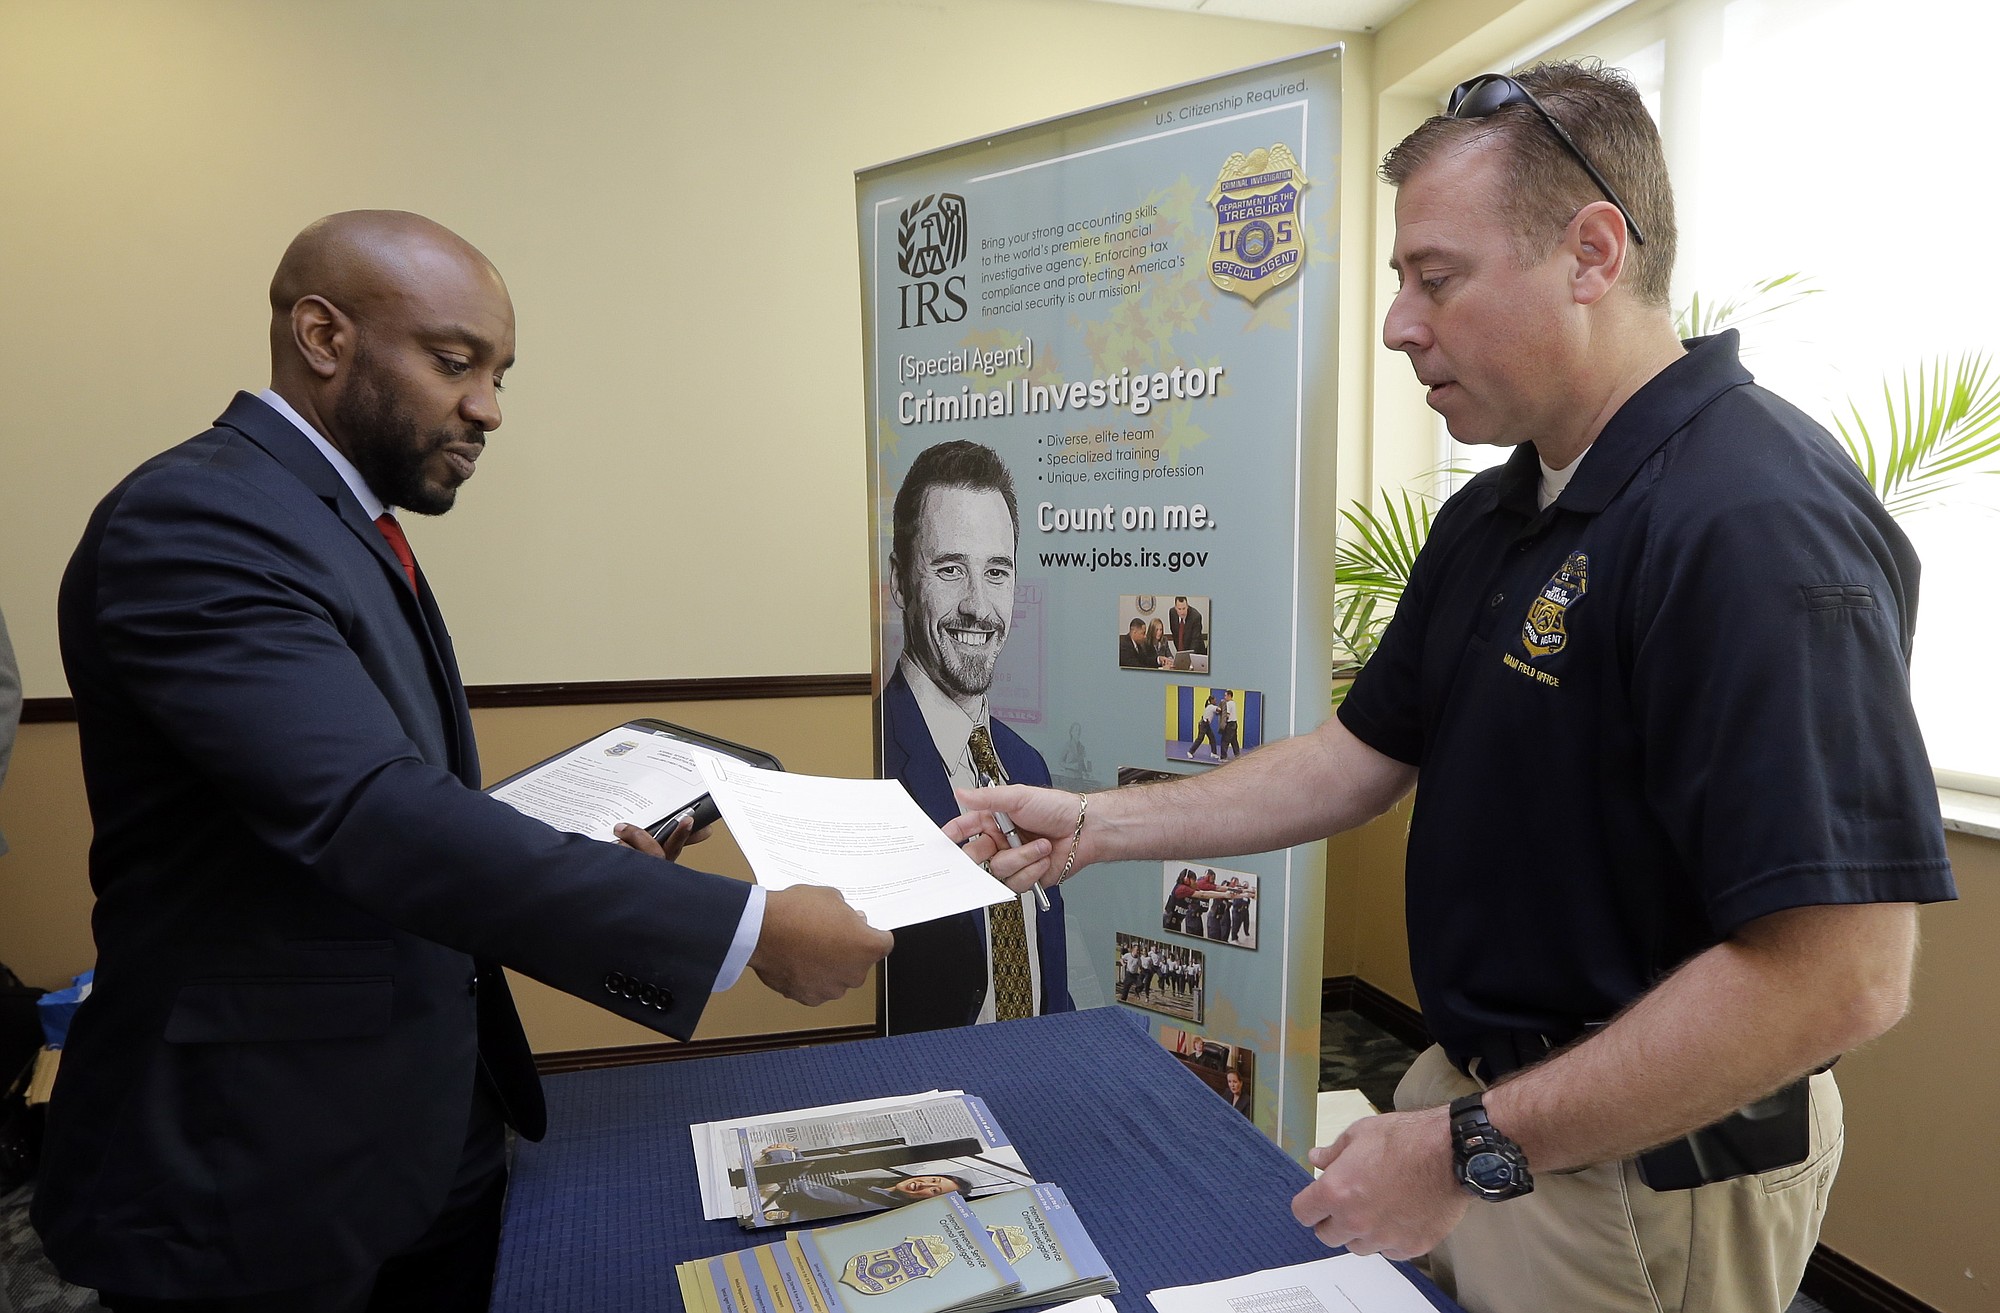 In this Feb. 6, 2015 photo, U.S. Marine Corps Veteran Arlington Robertson, of Fort Lauderdale, left, hands his resume to an Internal Revenue Service Special agent Feb. 6 at the annual Veterans Career and Resource Fair in Miami. The Labor Department reported Friday that employers added 295,000 jobs in February.